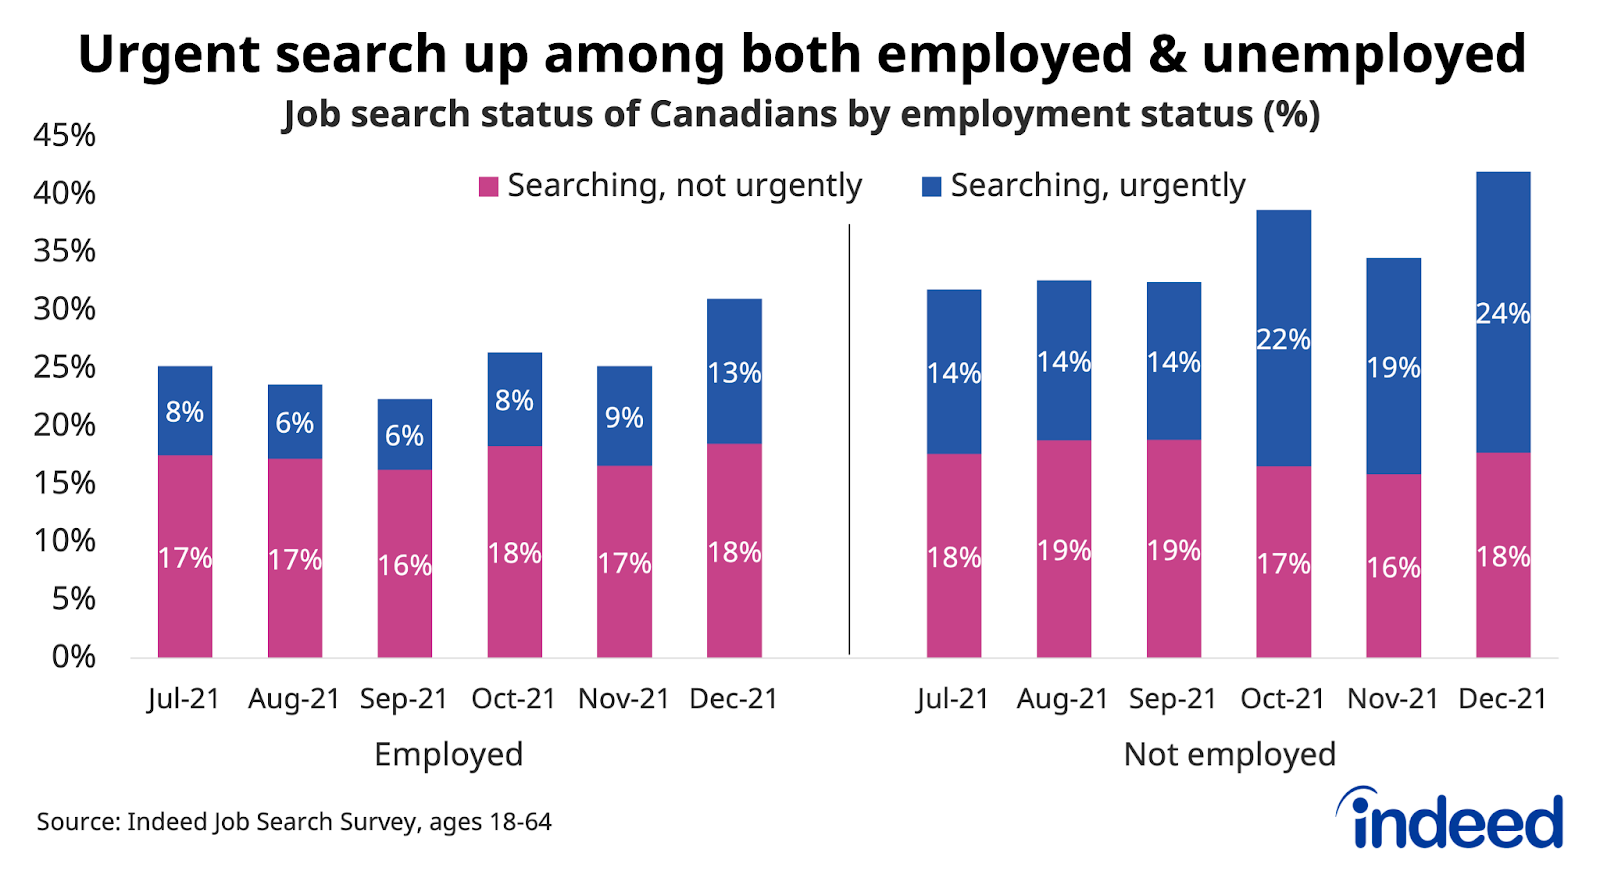 Bar chart titled “Urgent search up among both employed and unemployed.”